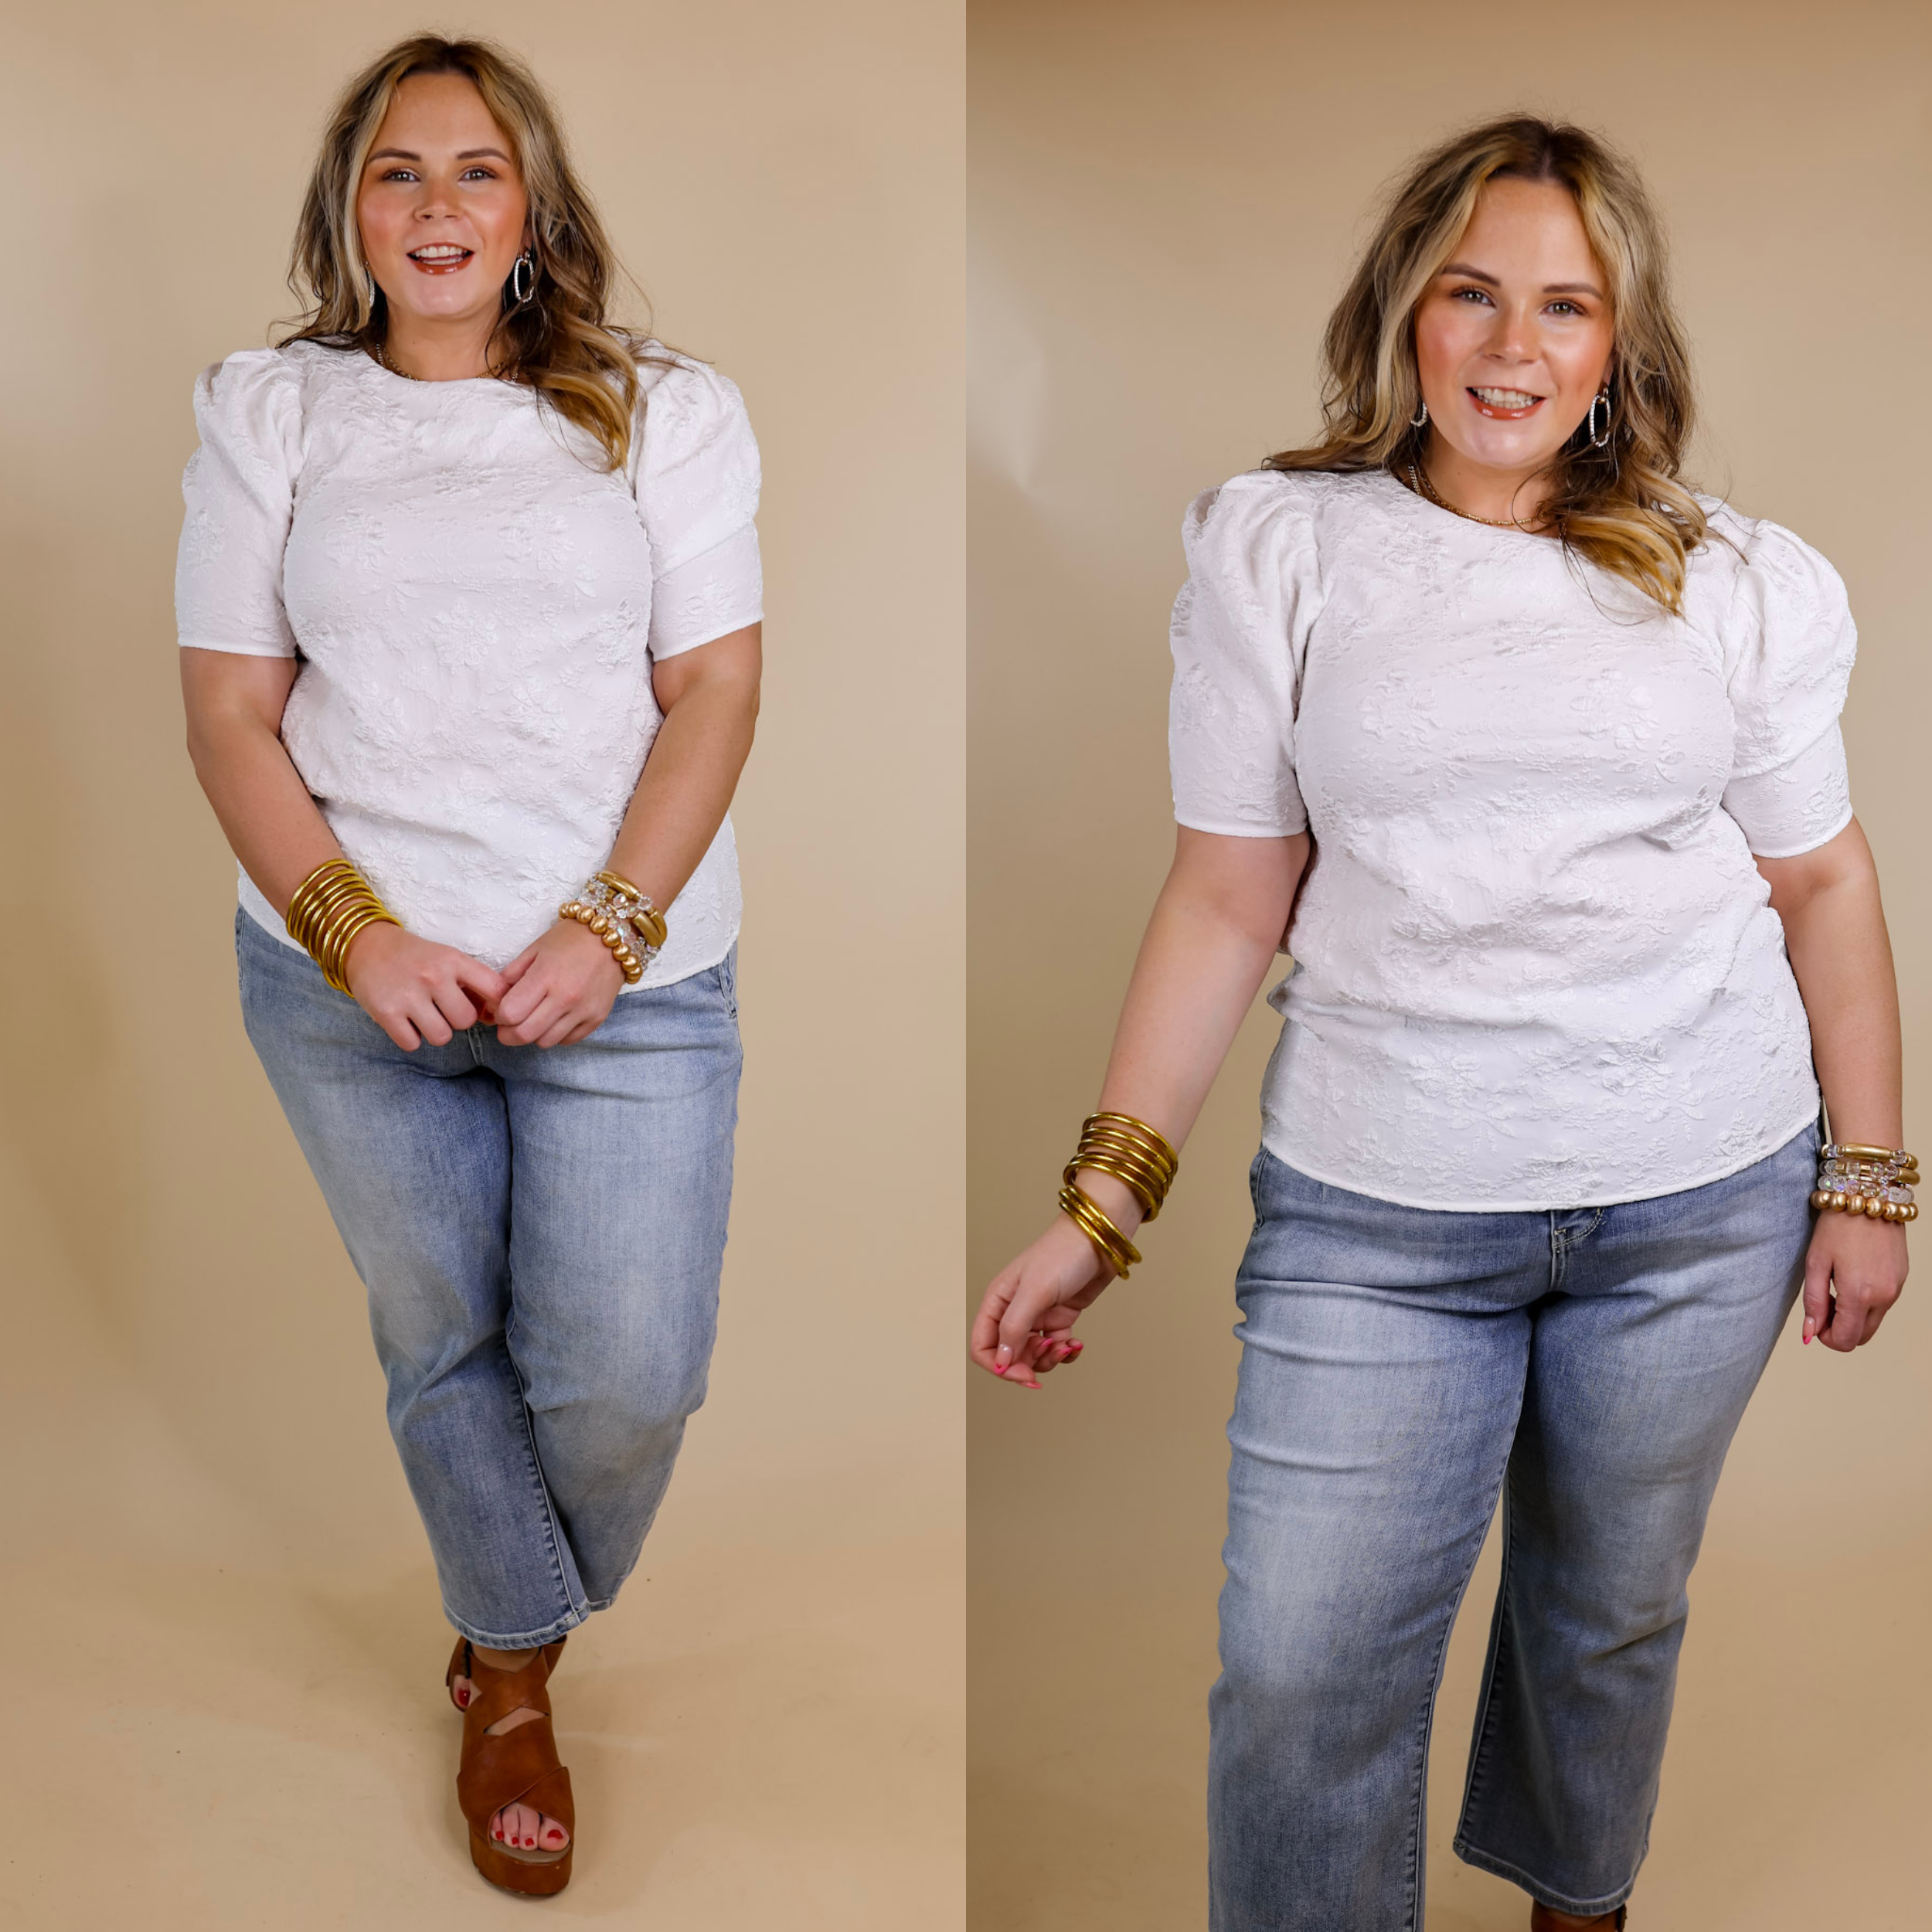 Model is wearing a floral embossed top with short puff sleeves in white. Model has it paired with light wash jeans, tan sandals, and gold jewelry.